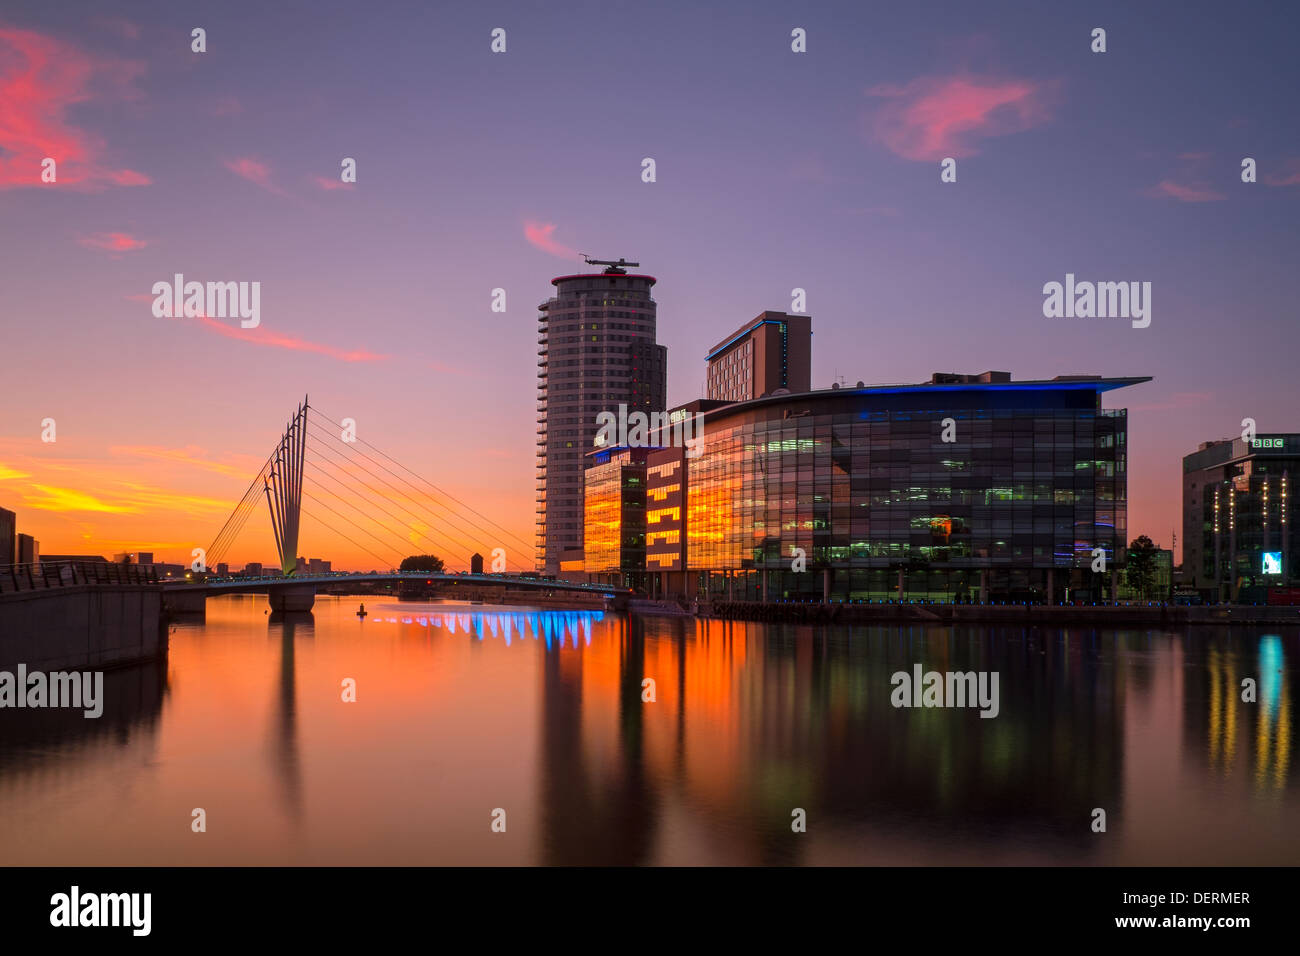 England, Greater Manchester, Salford Quays, Media City at sunset Stock Photo